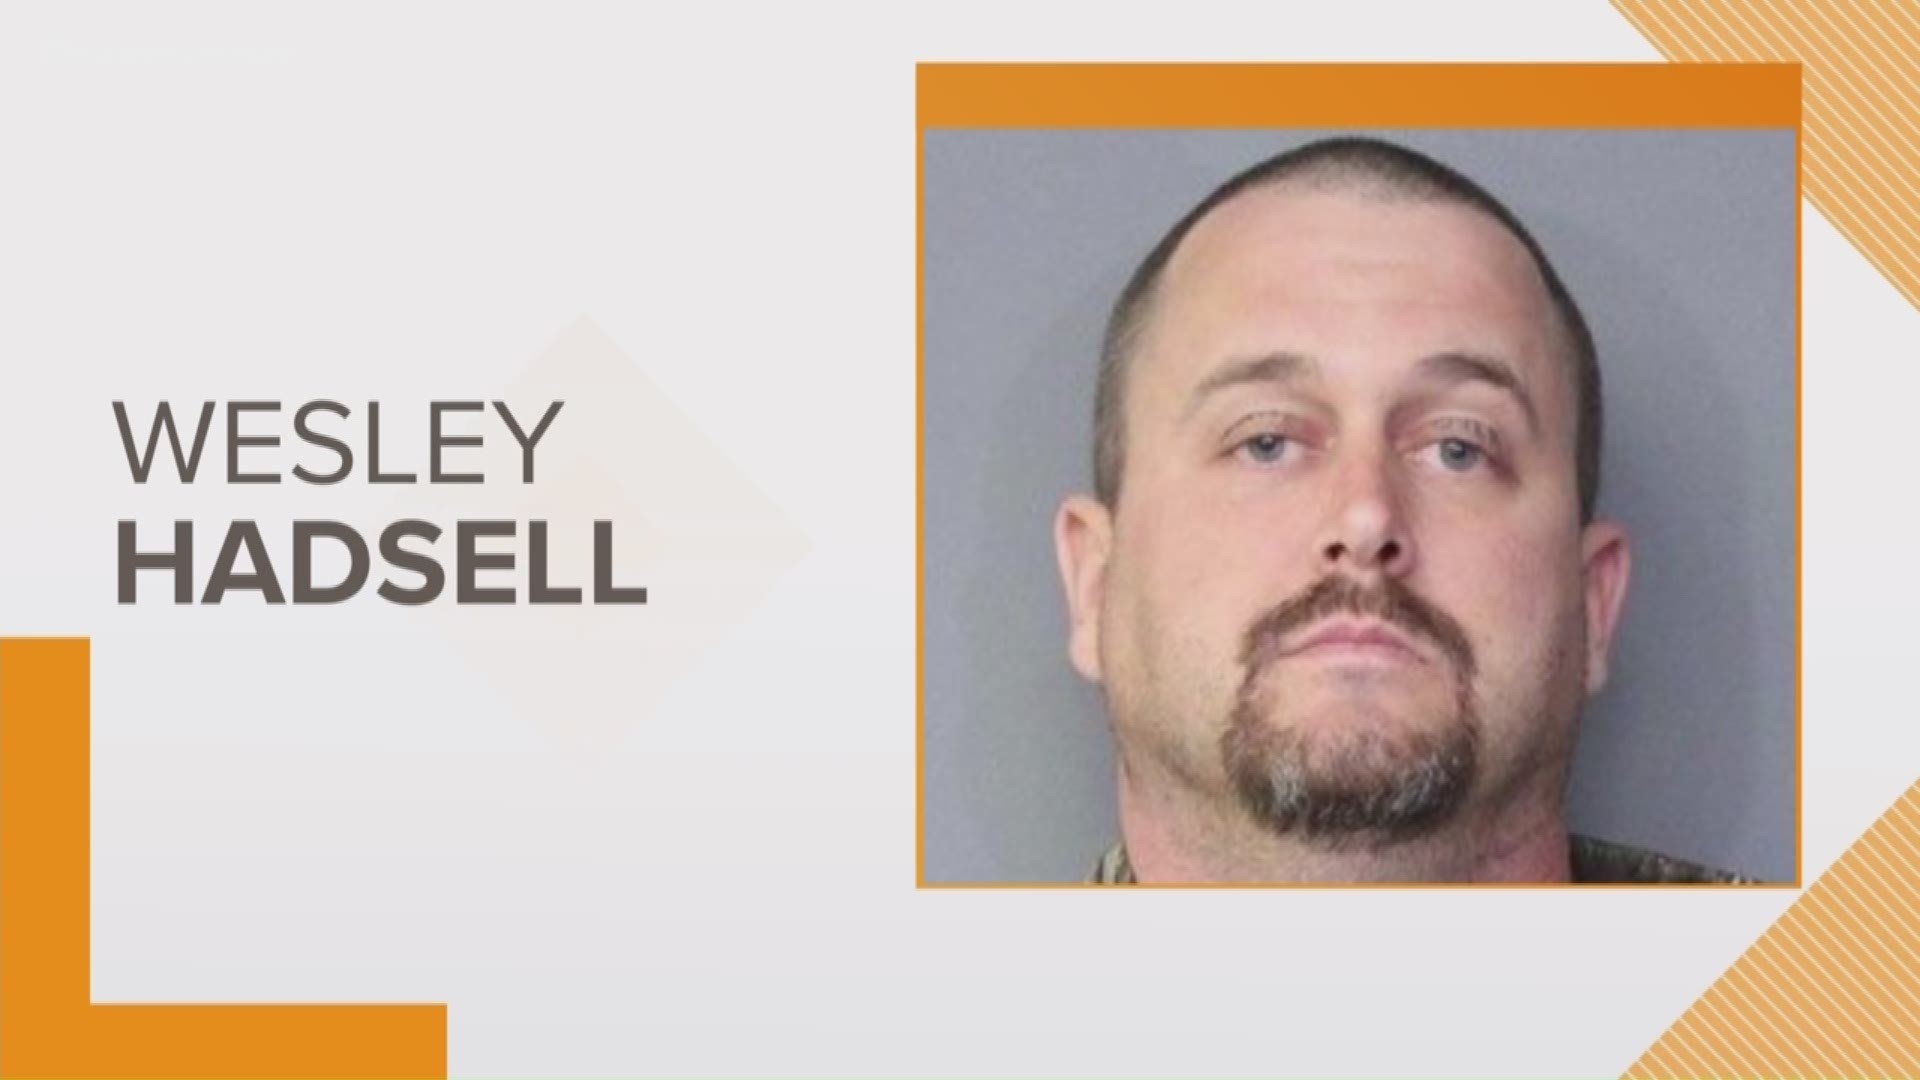 Wesley Hadsell is officially charged with the murder of his 18-year-old stepdaughter, Angelica "AJ" Hadsell.